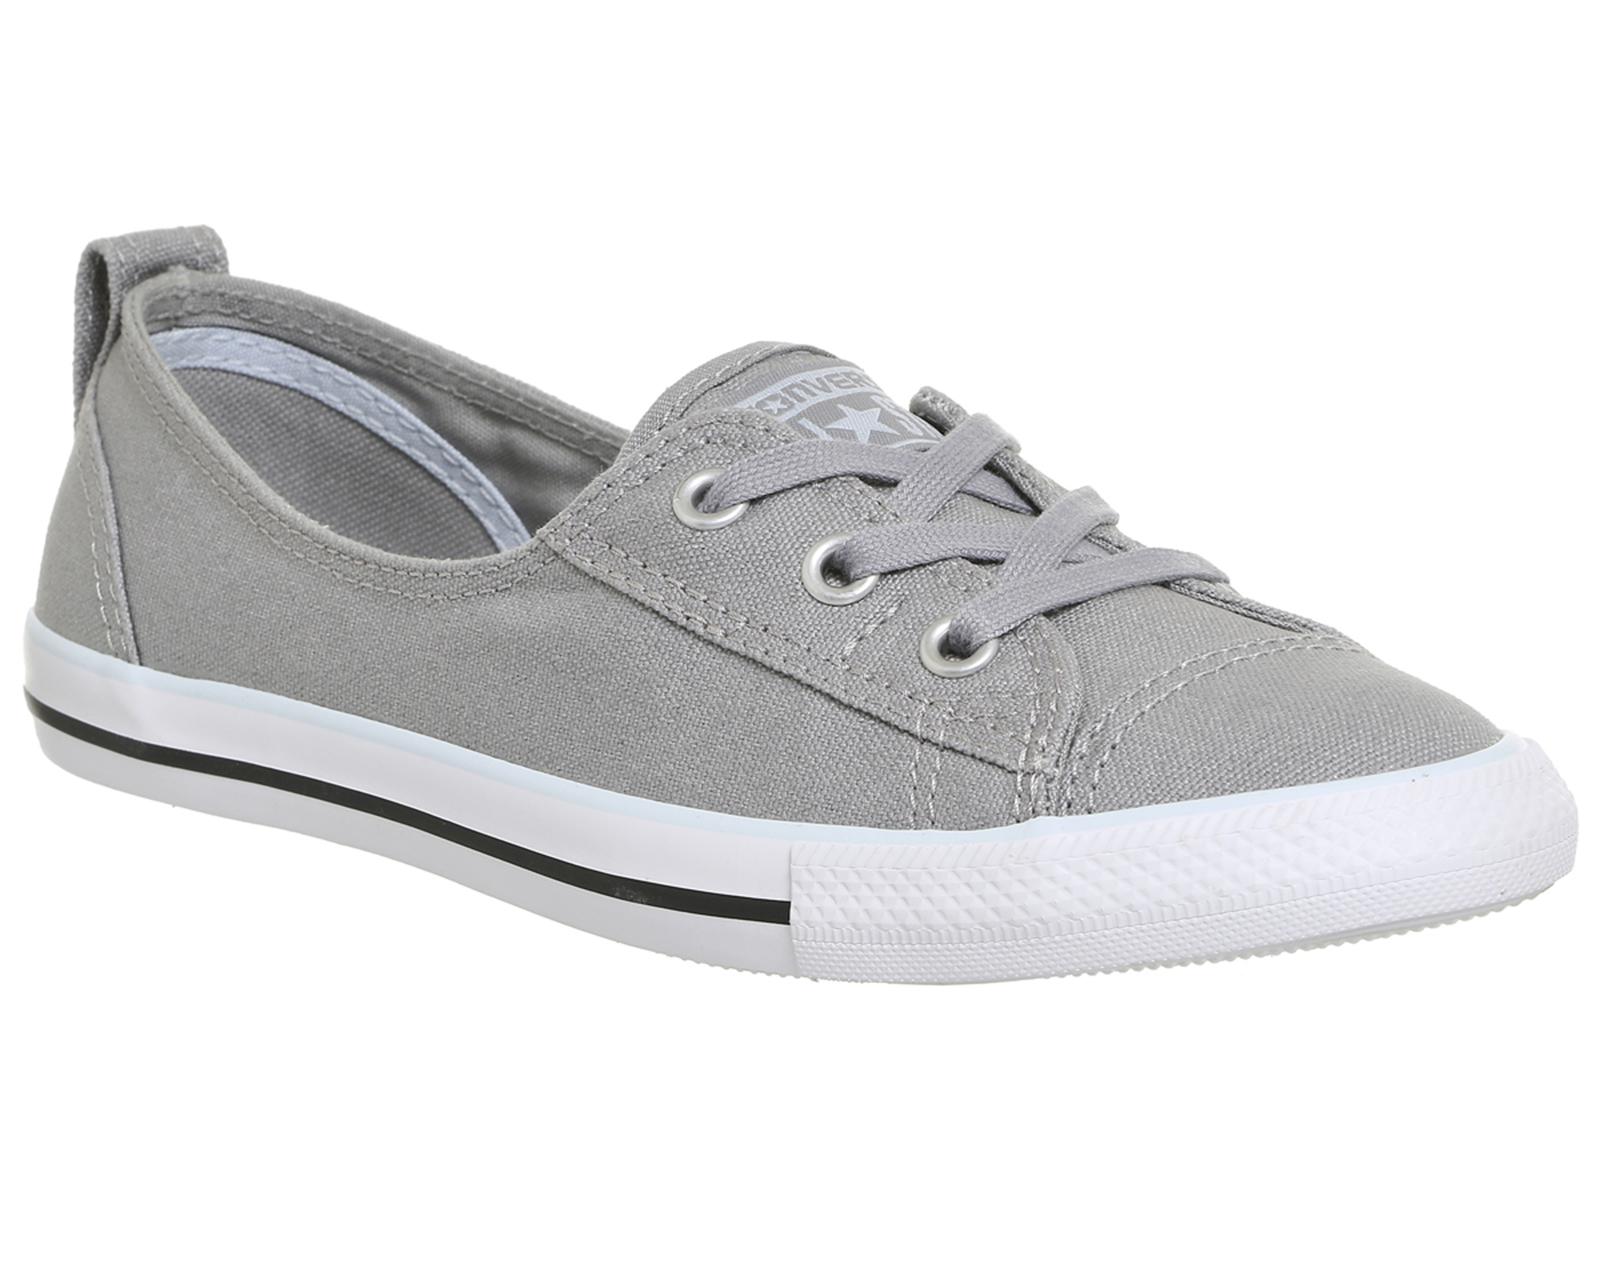 Converse Ctas Ballet Lace Trainers in Ash (Gray) - Lyst